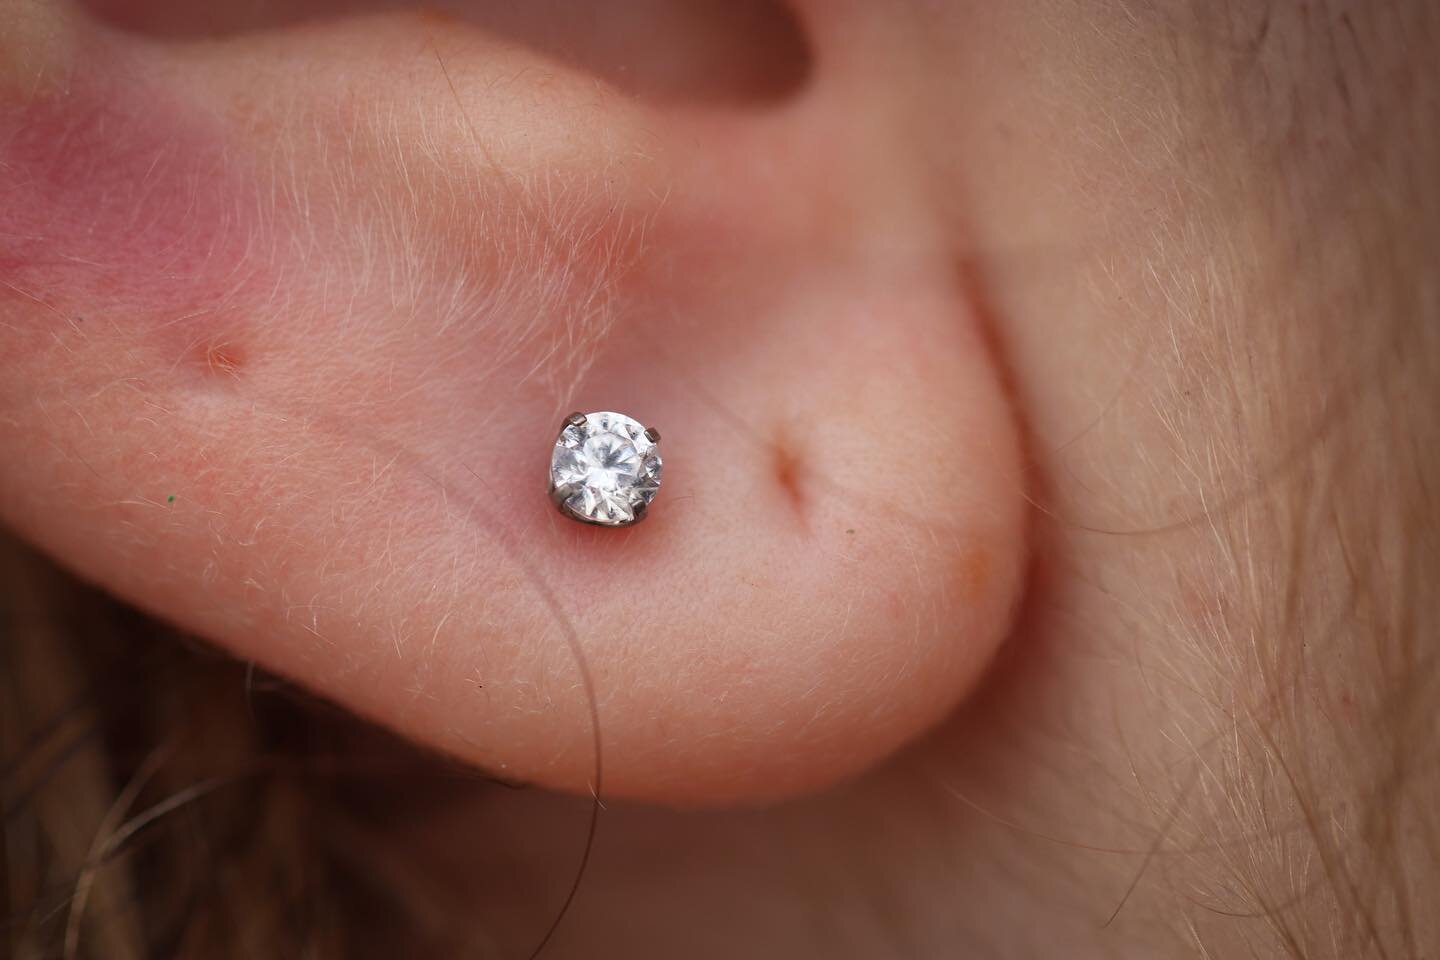 Fresh lobe from the other day with a prong set CZ from Neometal!

#lobepiercing #titanium #jewelry #neometal #lakepark #florida #westpalmbeach #miami #jupiter